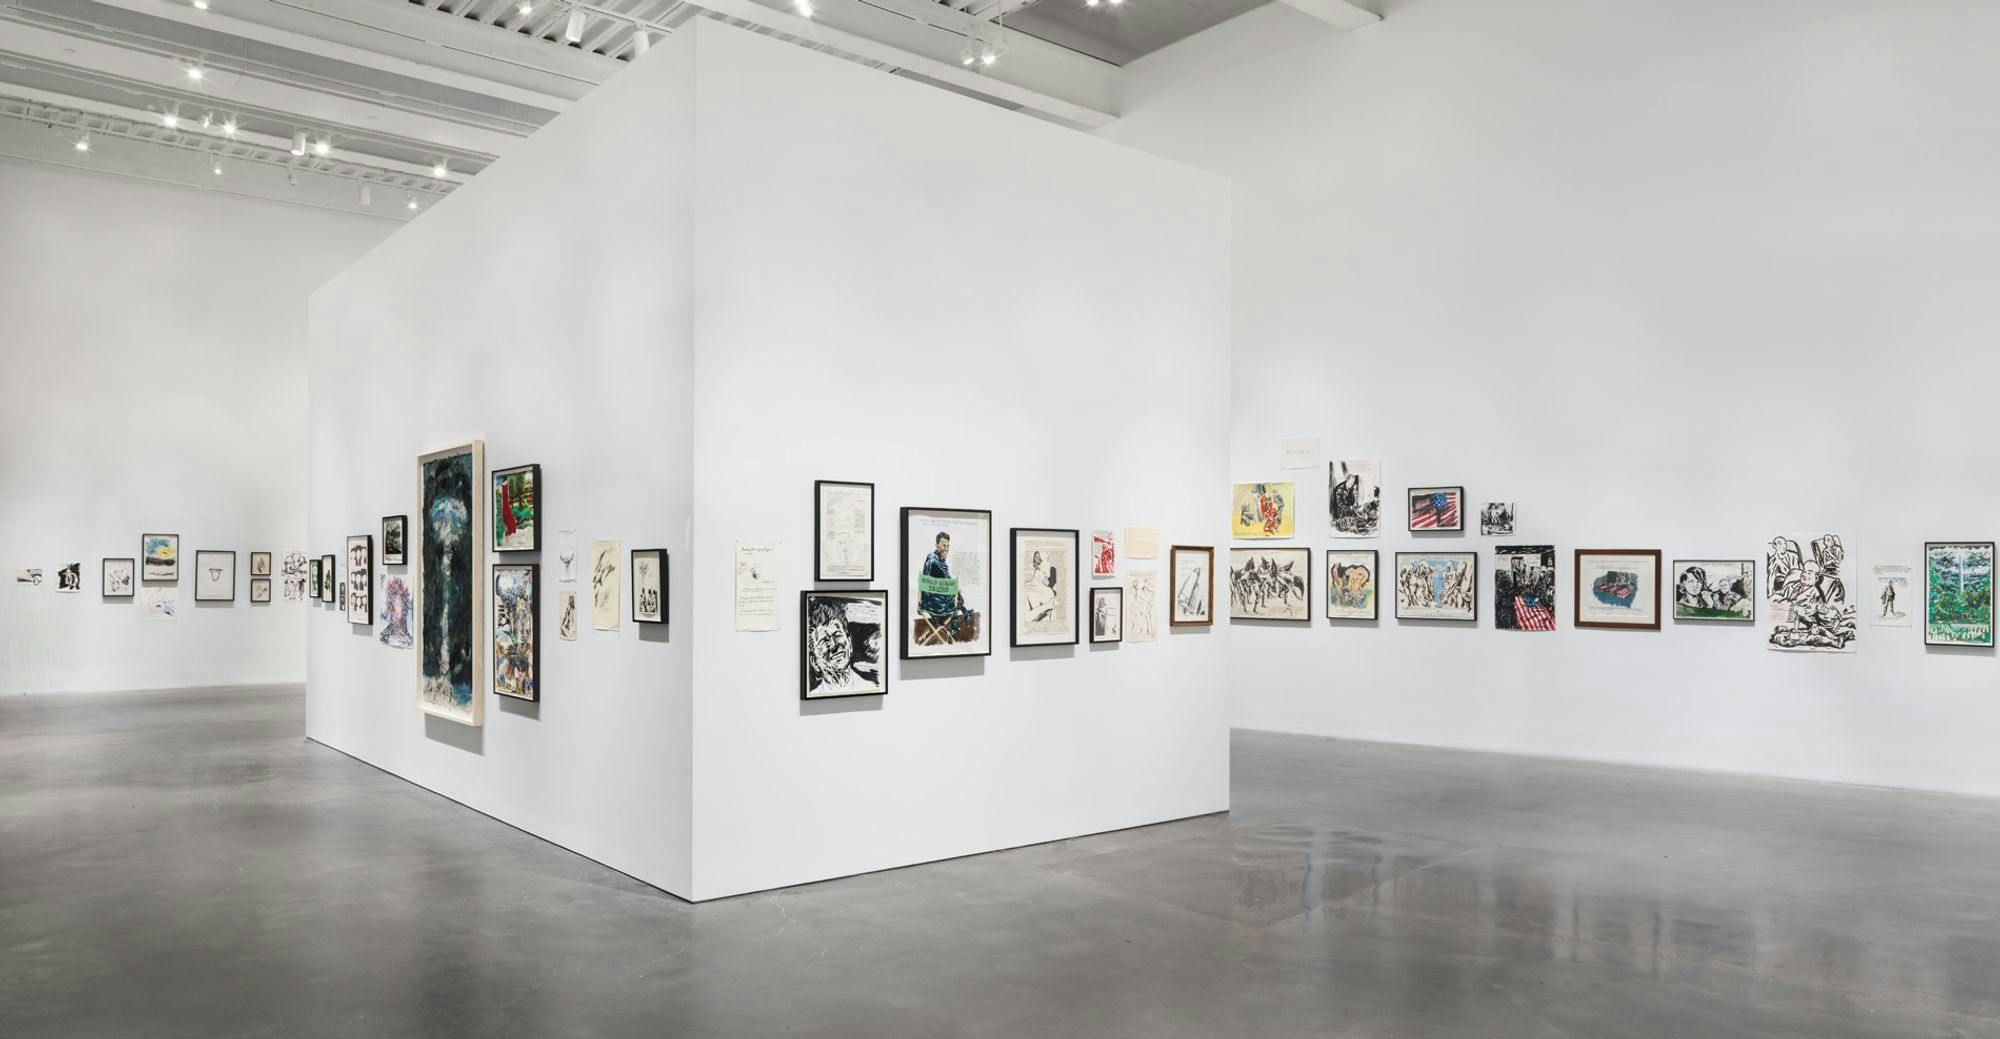 An installation view of drawings by Raymond Pettibon on view at the New Museum of Art, New York, 2017